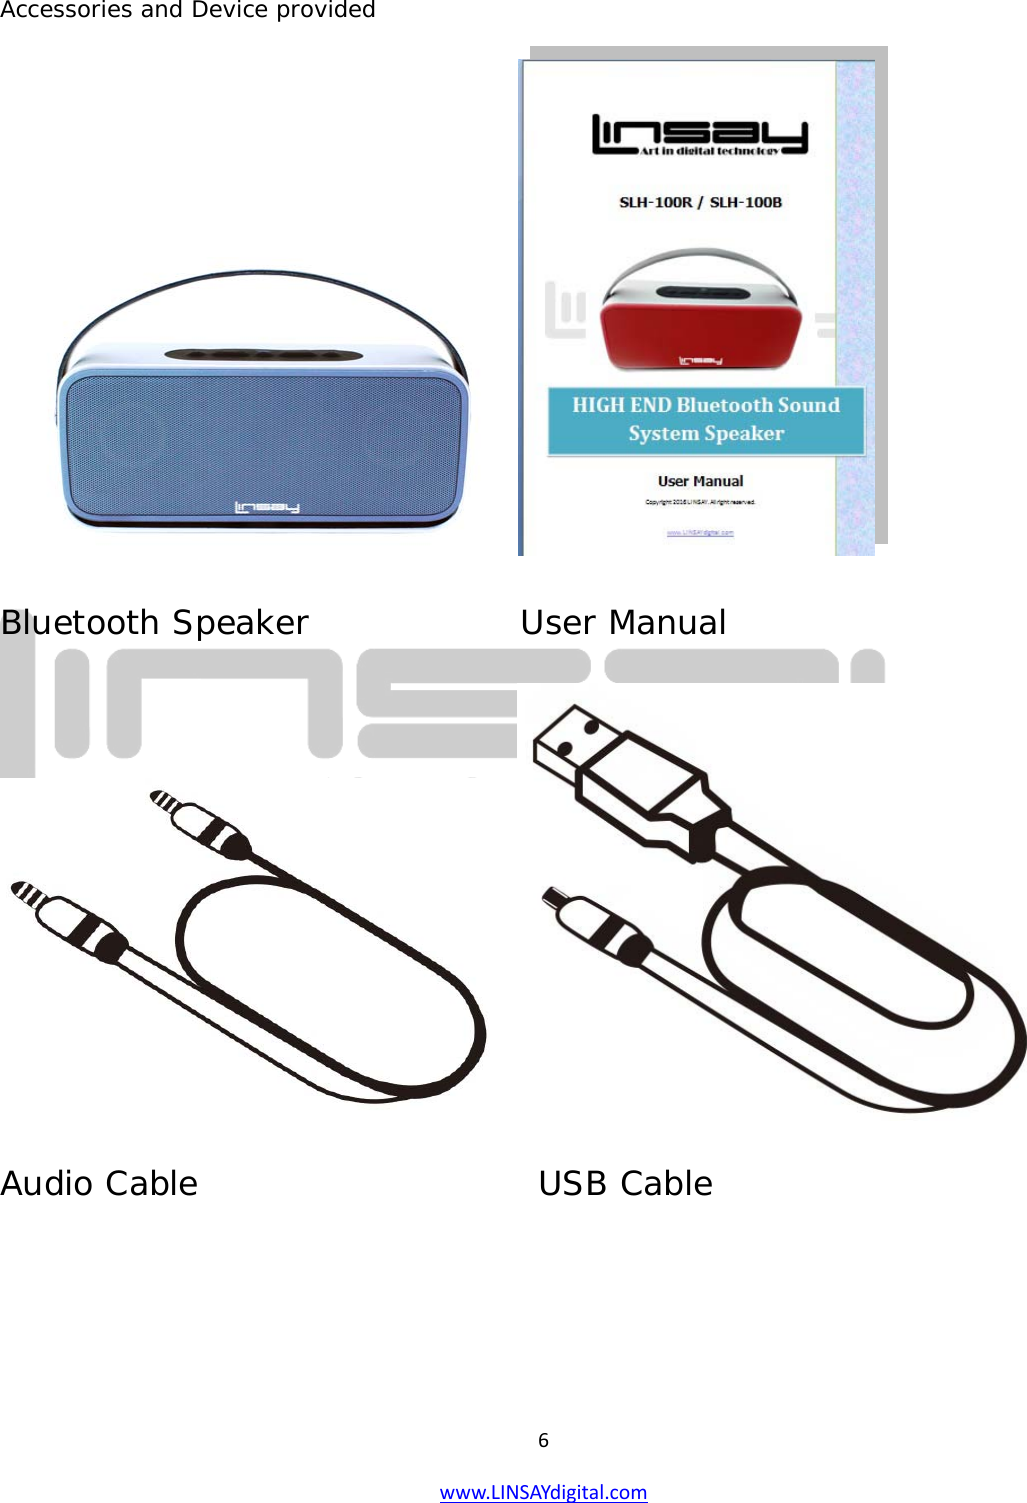  6 www.LINSAYdigital.com   Accessories and Device provided   Bluetooth Speaker                  User Manual  Audio Cable                             USB Cable   